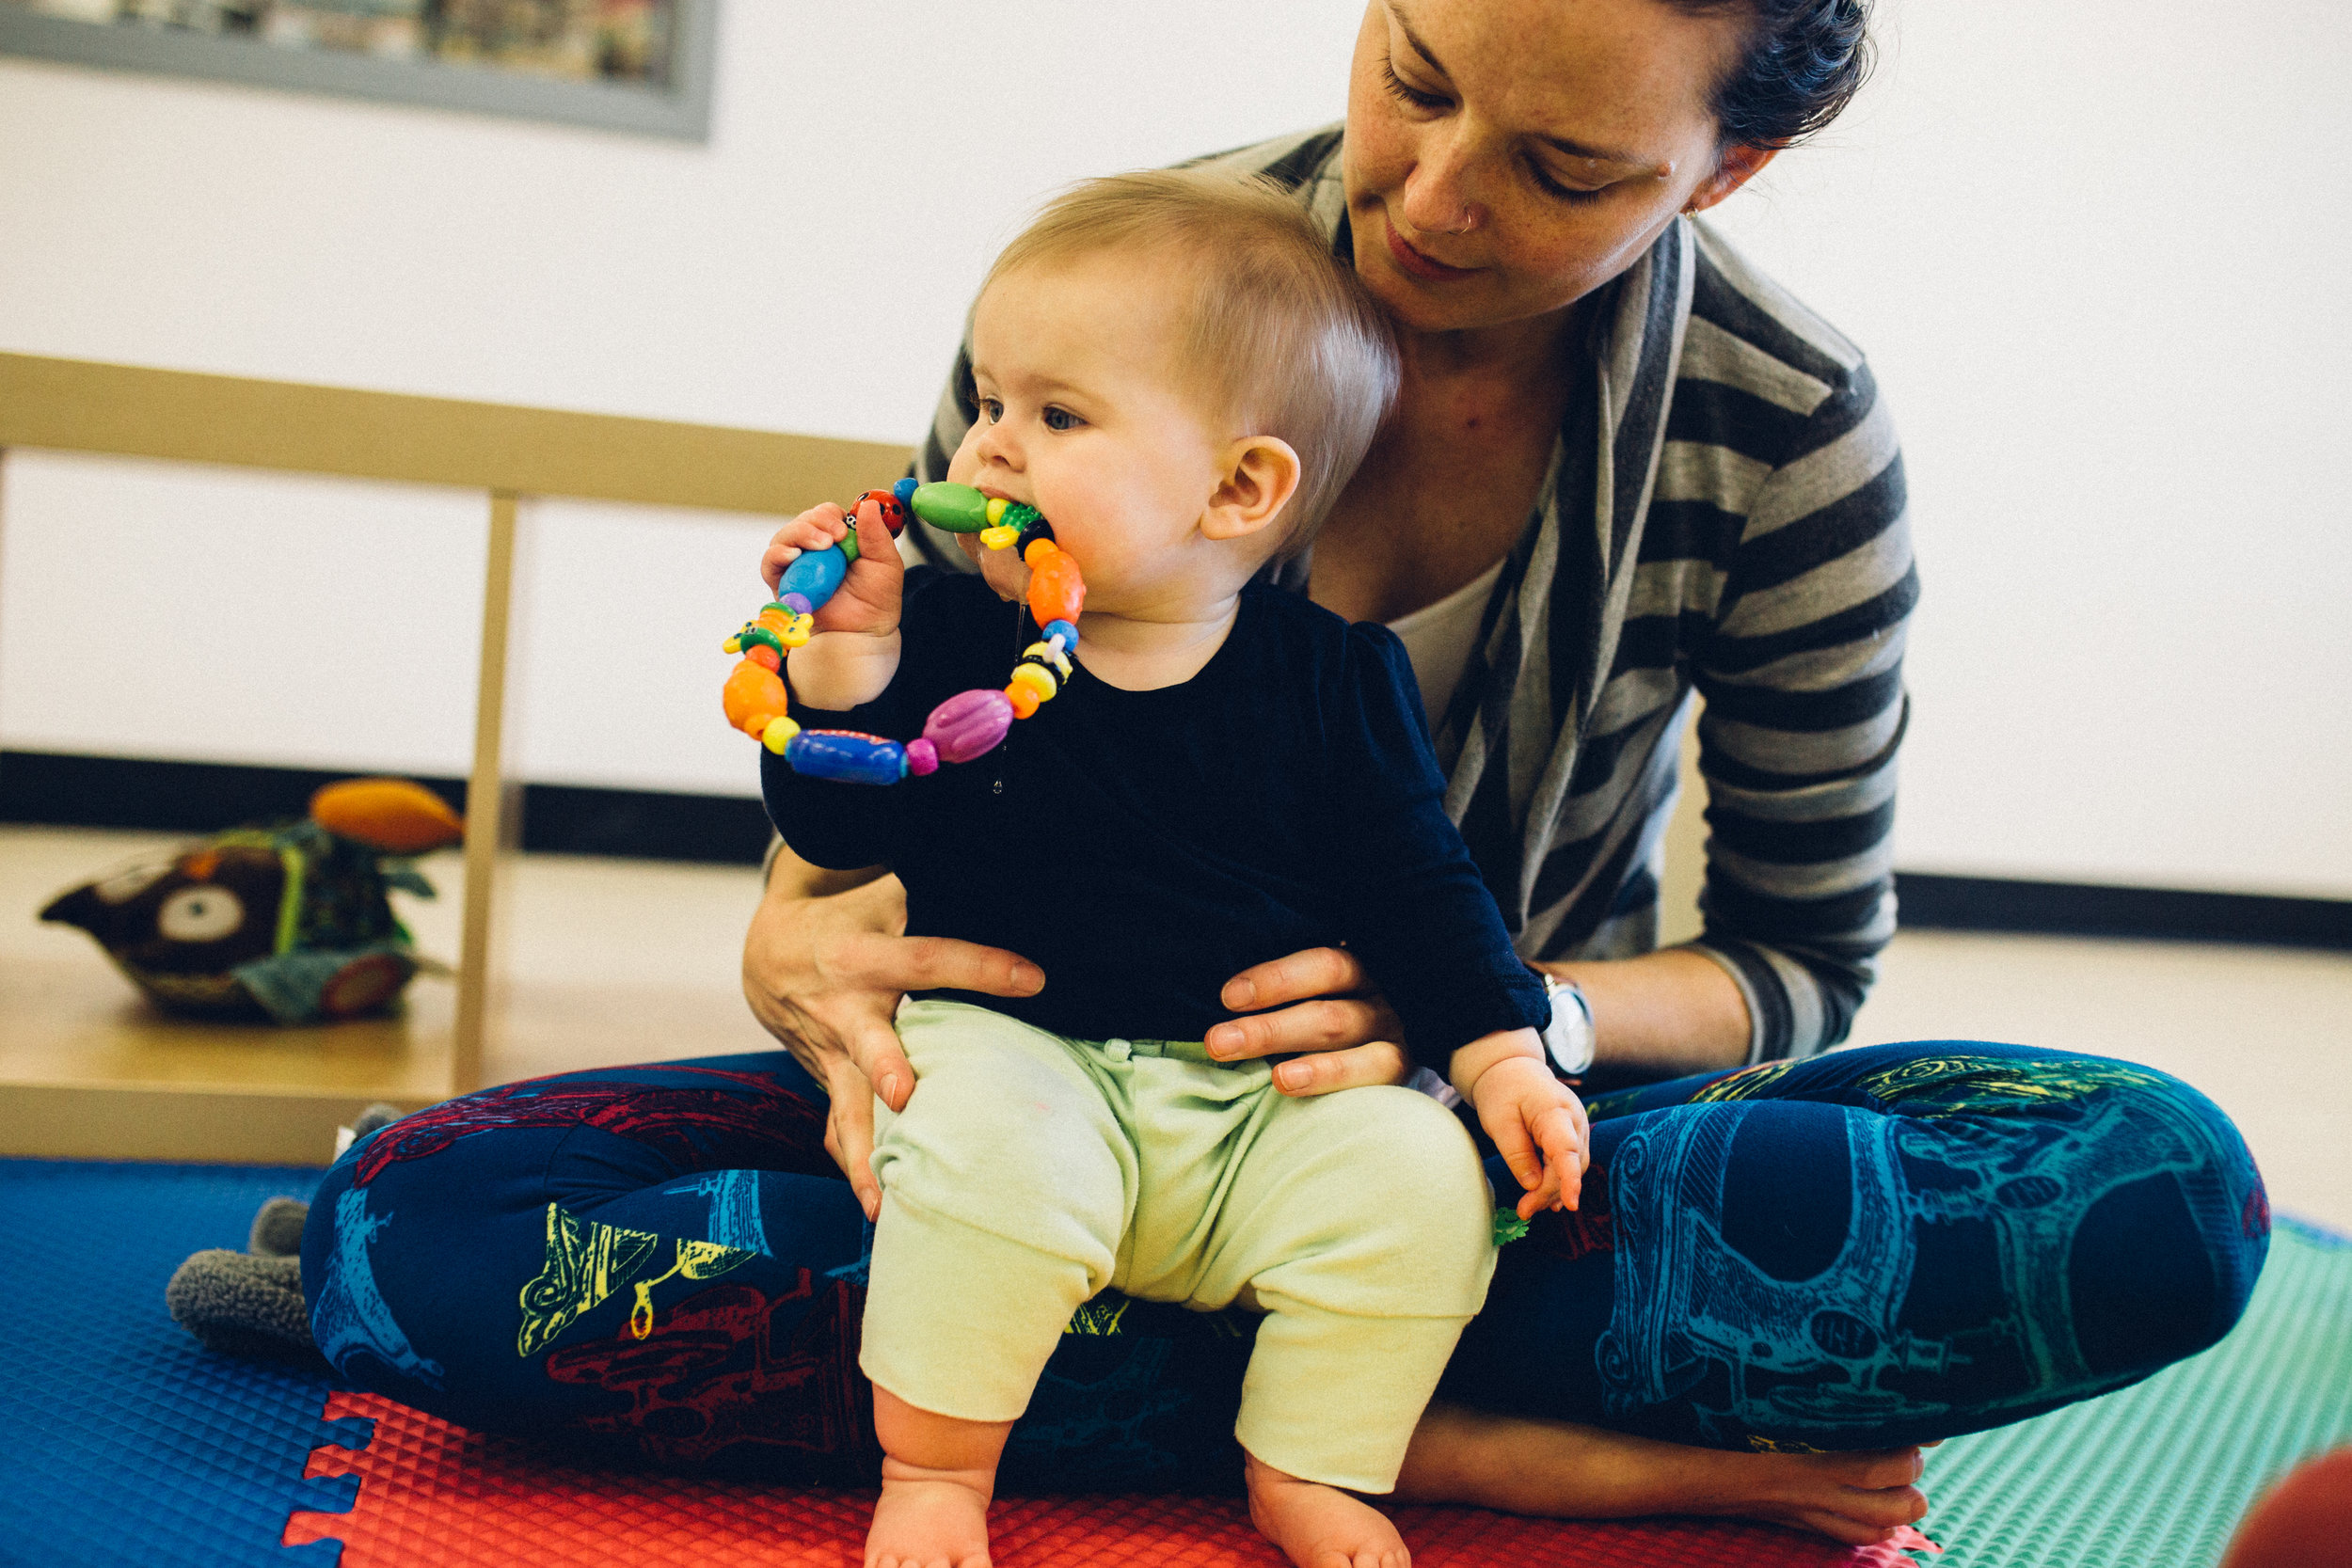 Pediatric physical therapy services to maximize each child's potential